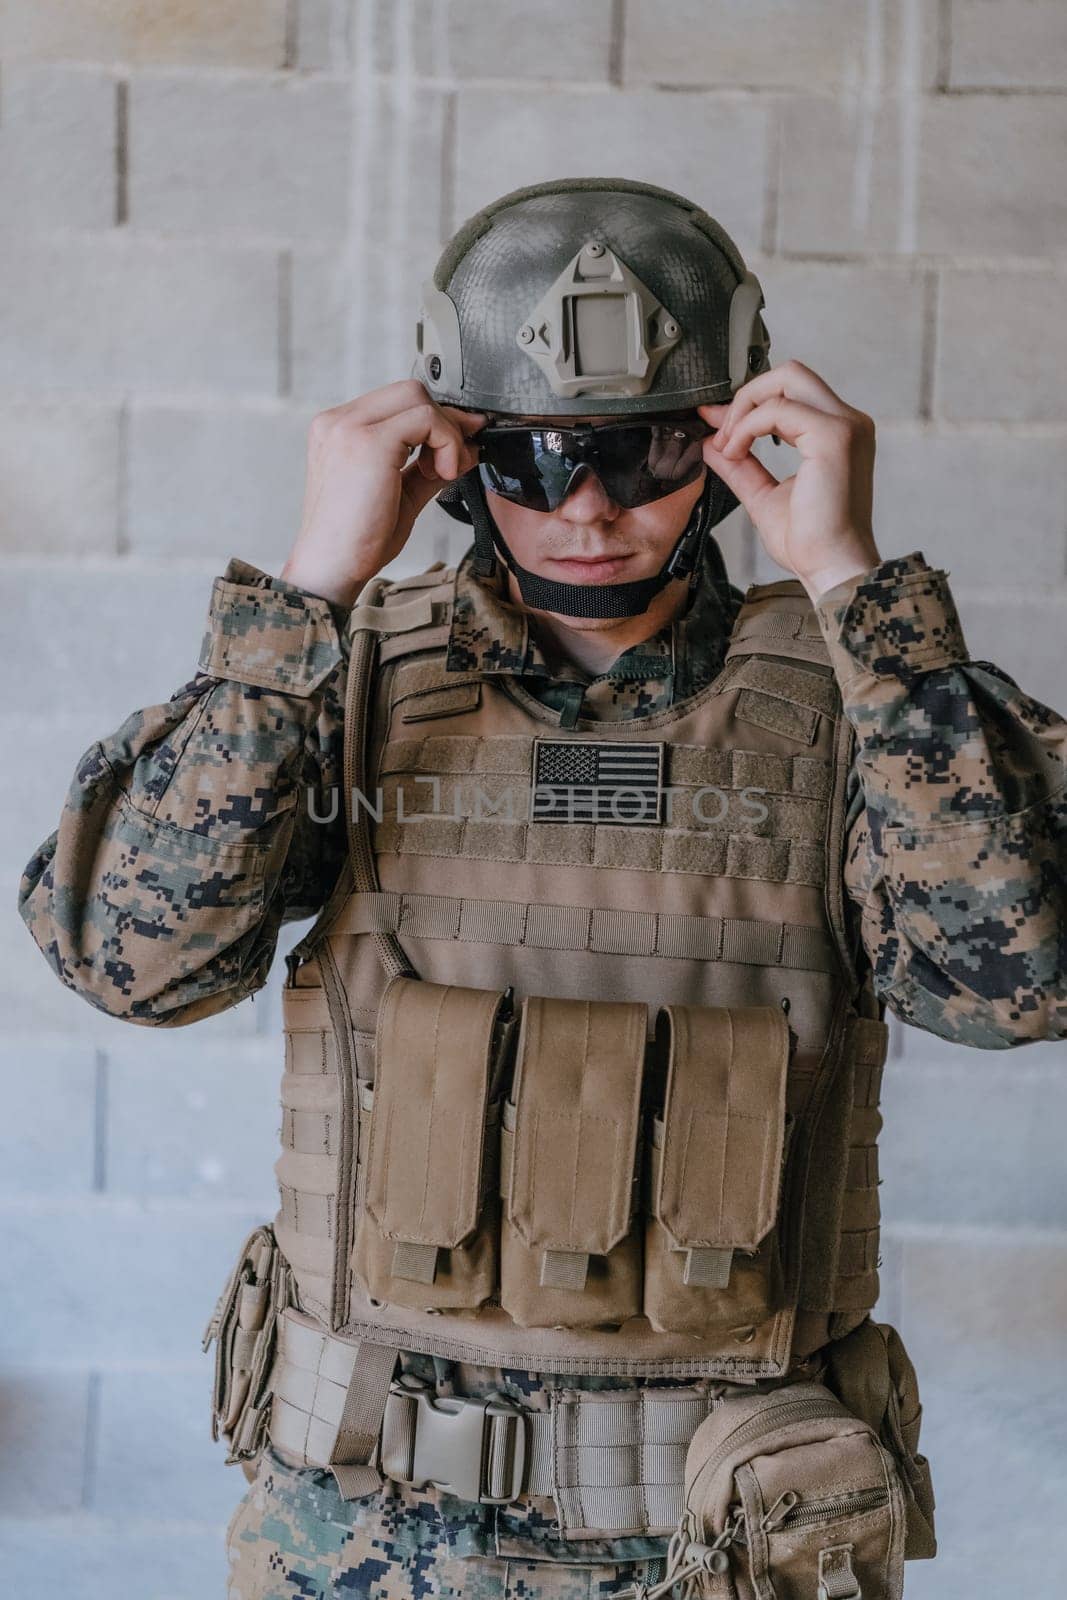 Soldier preparing tactical protective and communication gear for action battle.